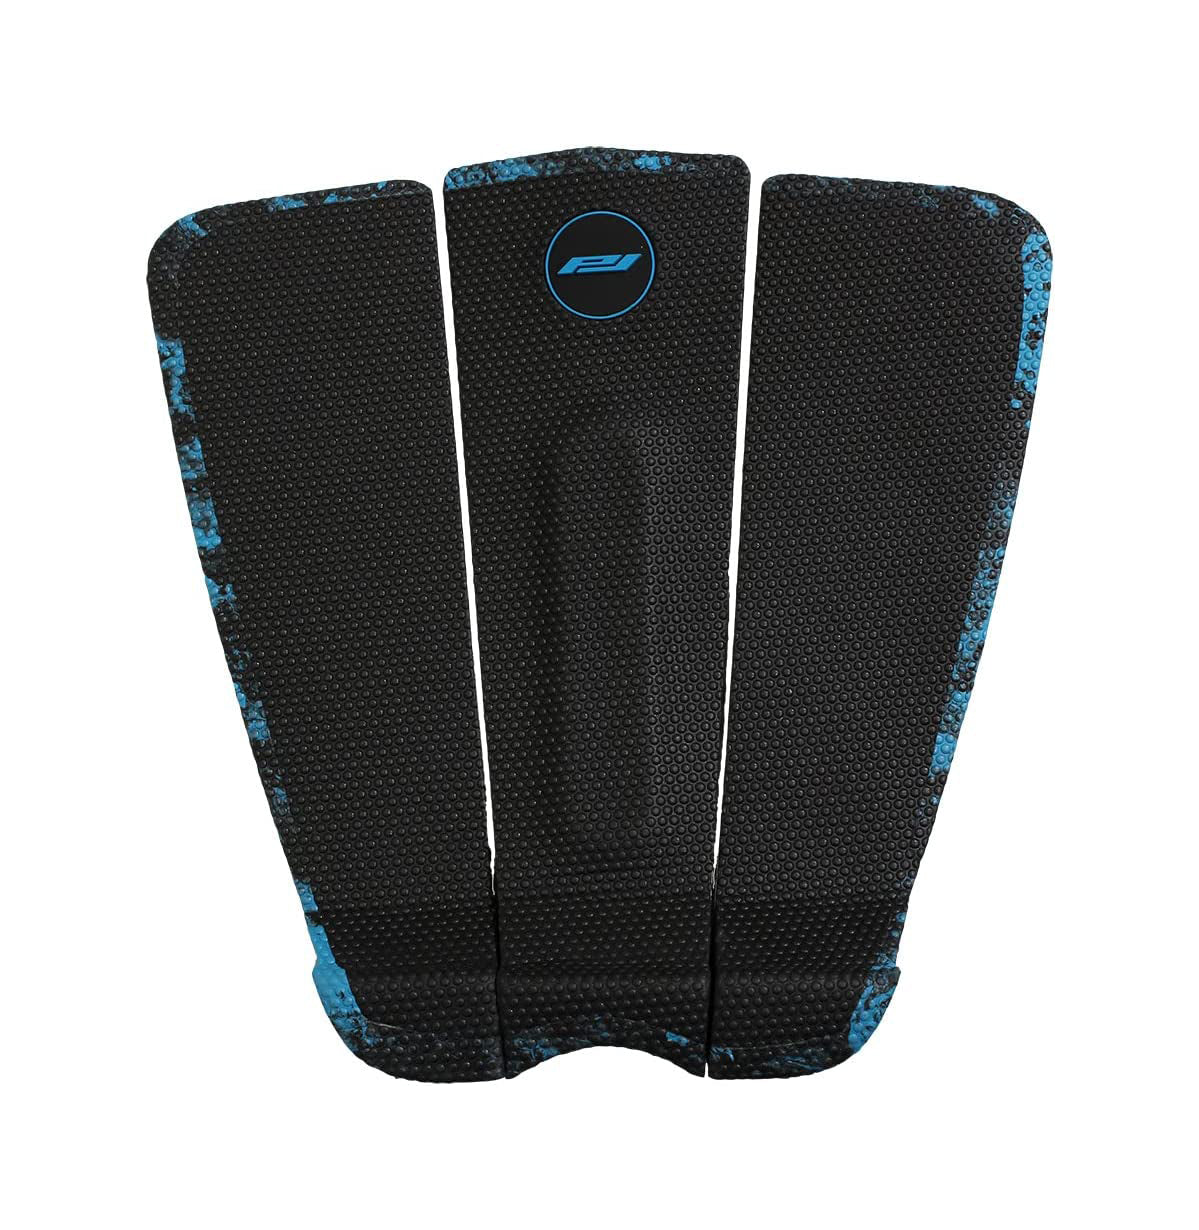 Pro-Lite Ethan Osborne Pro Traction Pad - Micro Dot Tail Black-Black and Cyan Marble-V2